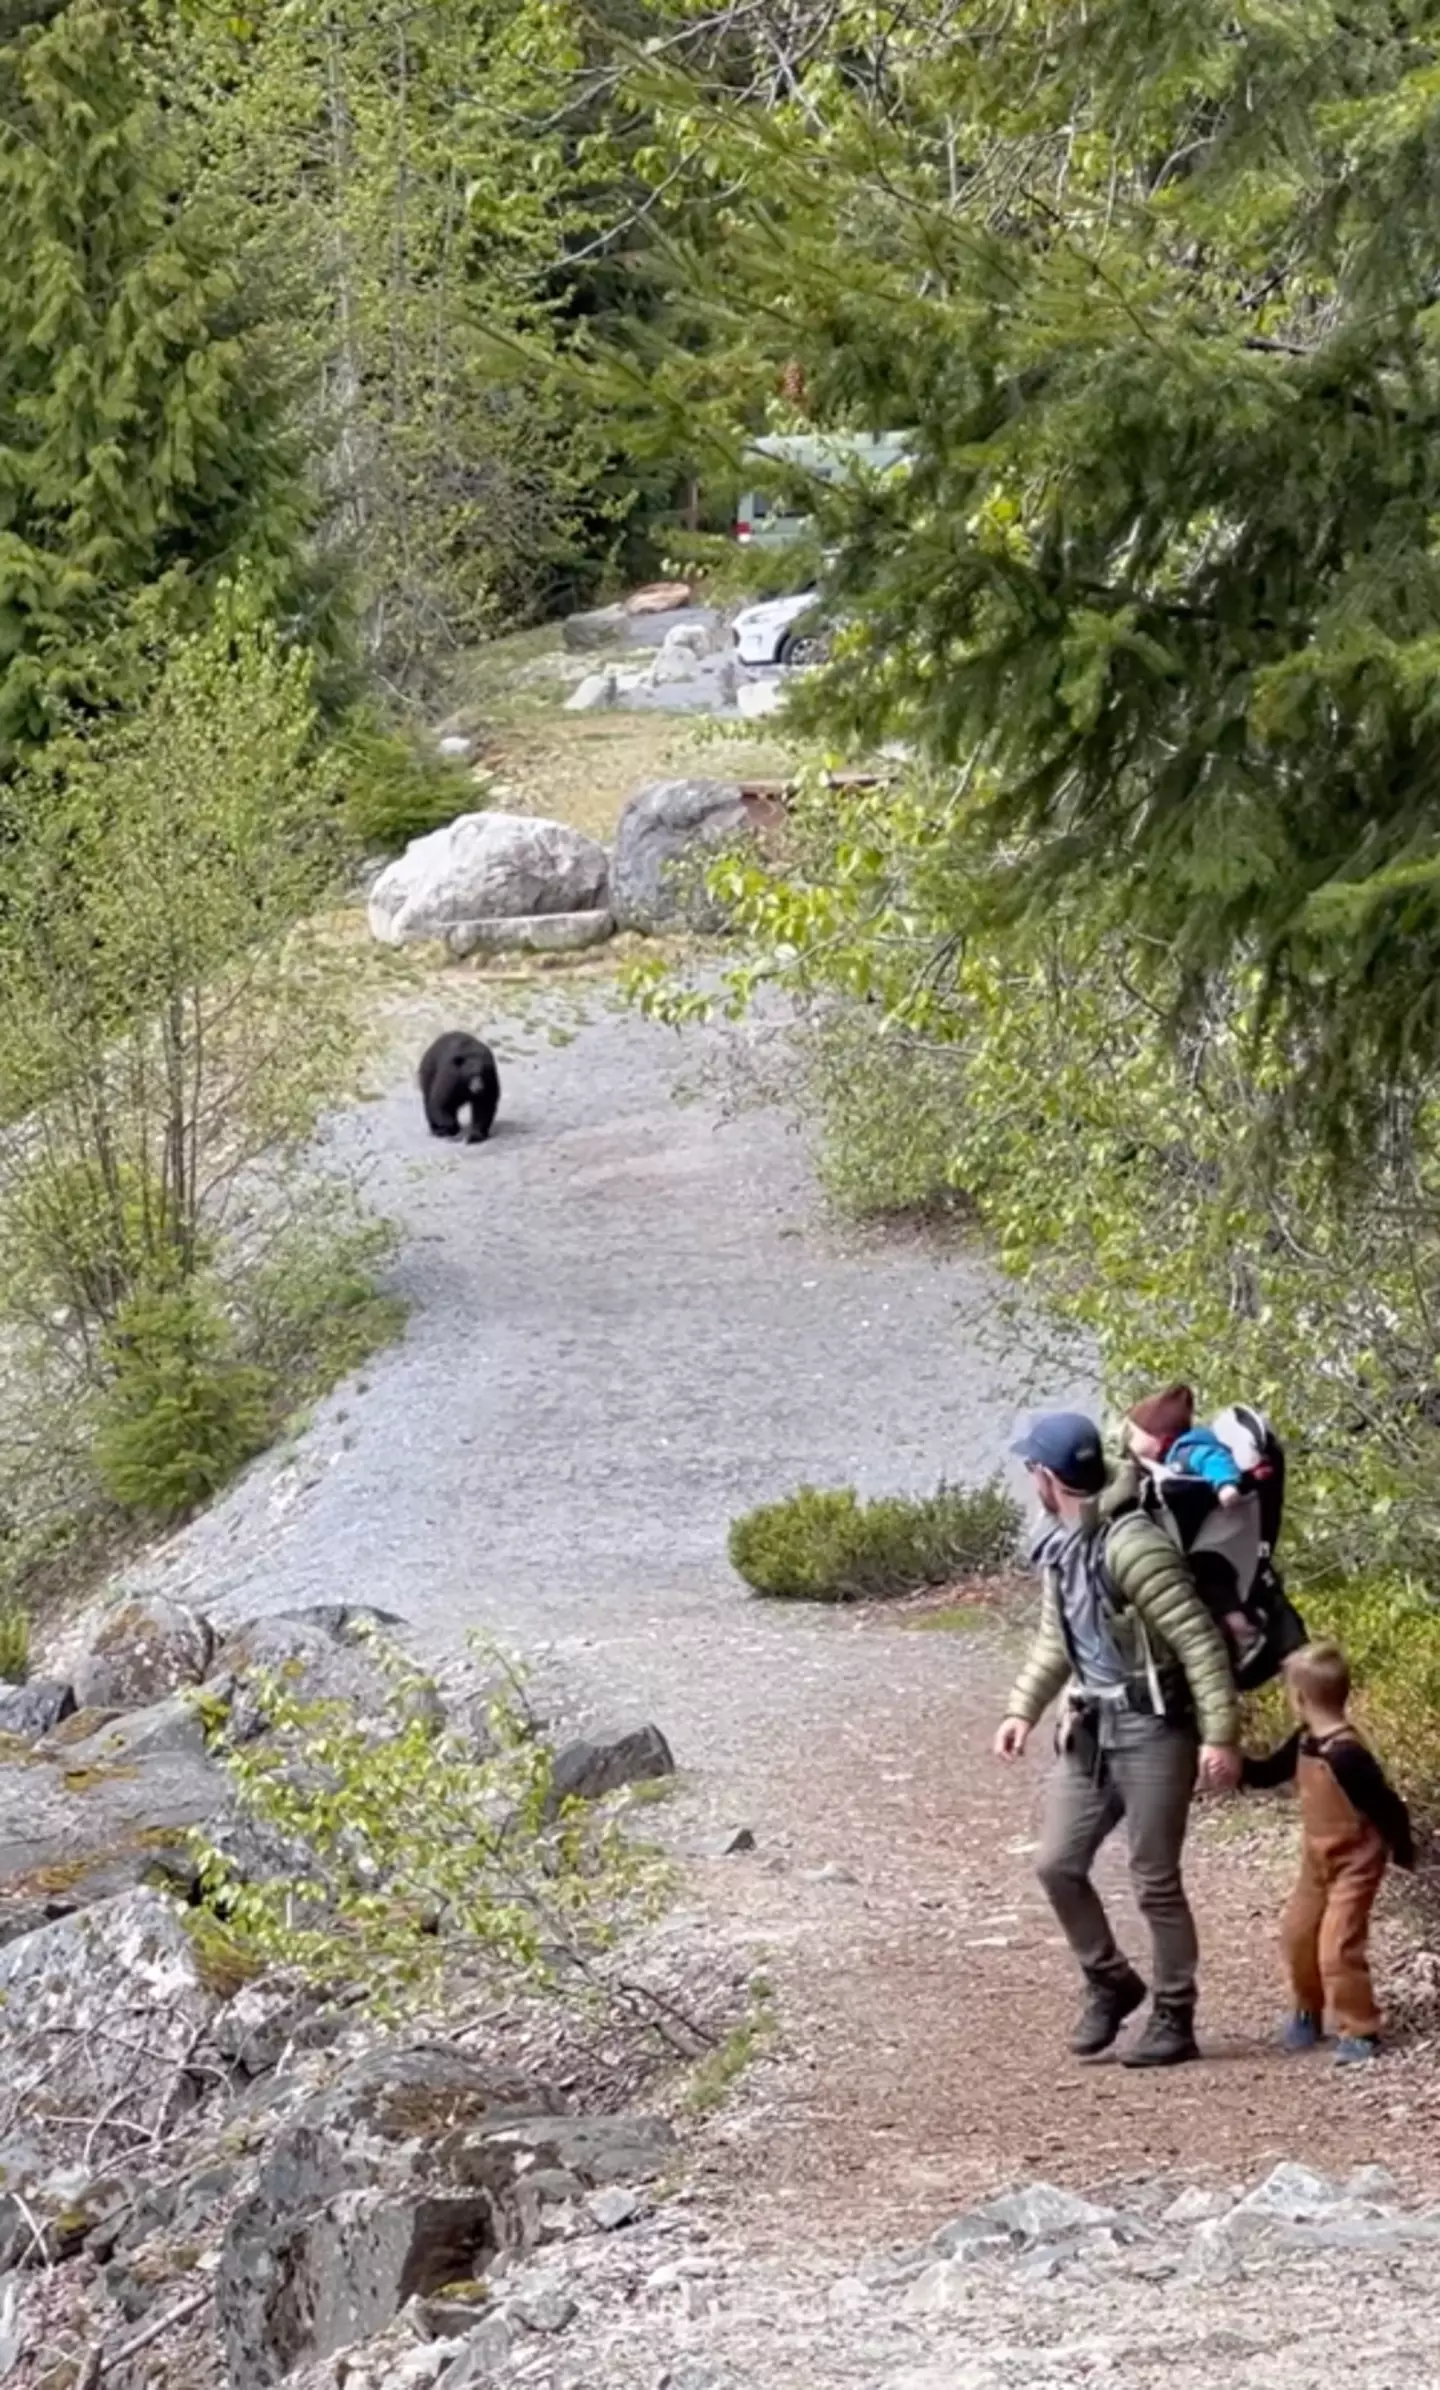 A lifestyle blogger has shared footage of her family’s nerve-shredding encounter with a black bear.